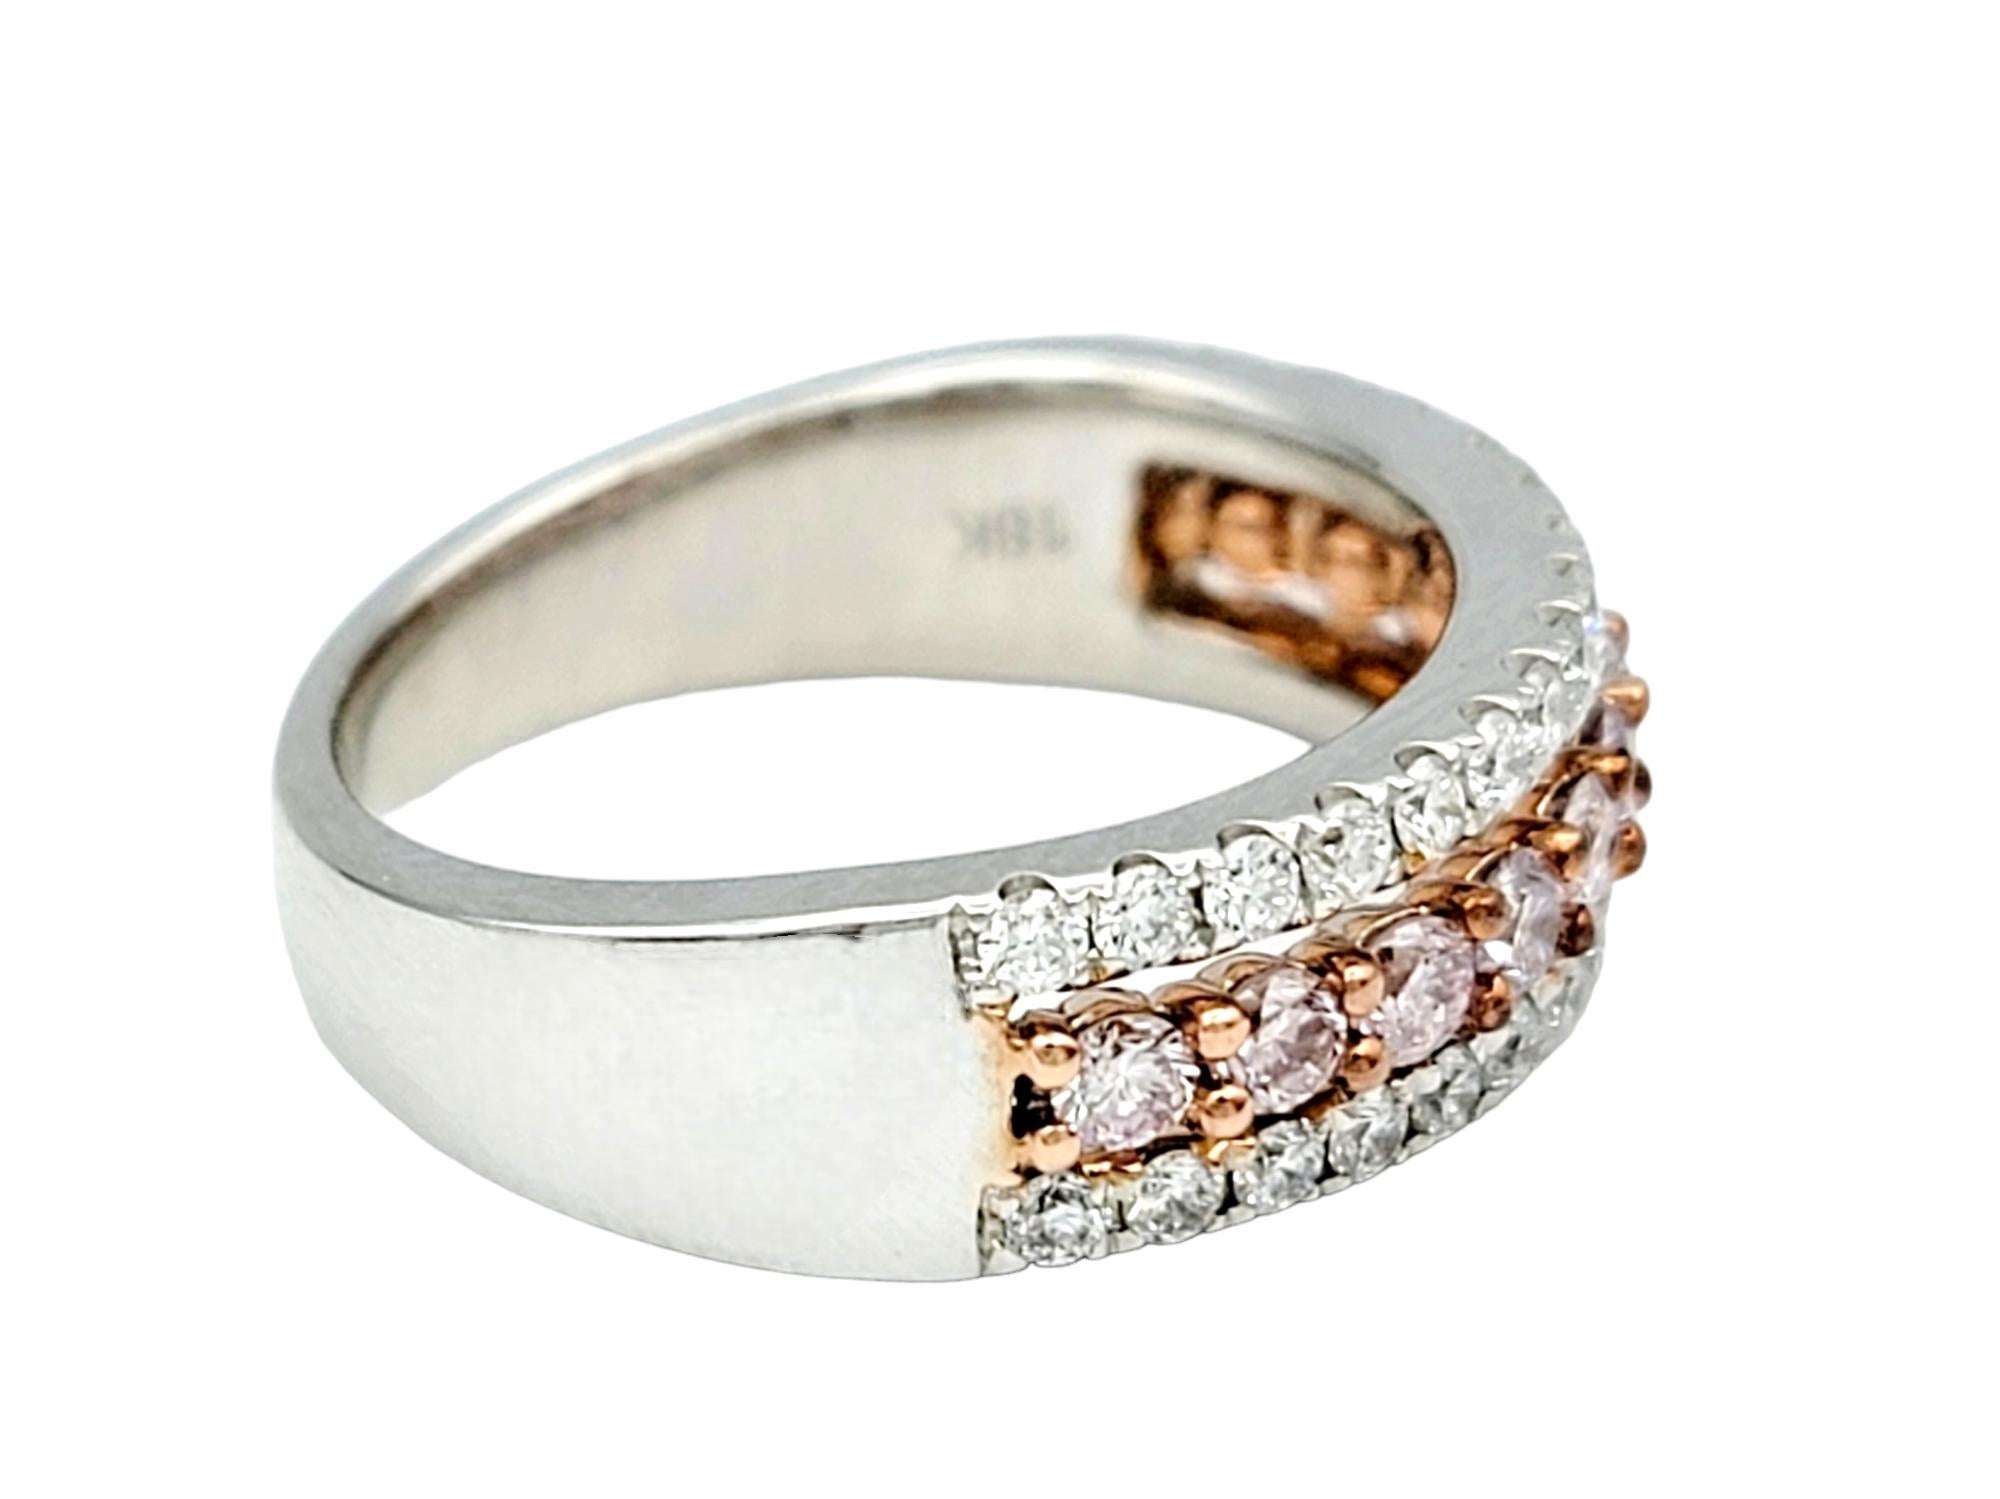 Pink and White Pave Diamond Triple Row Semi-Eternity Band Ring in 18 Karat Gold In Excellent Condition For Sale In Scottsdale, AZ